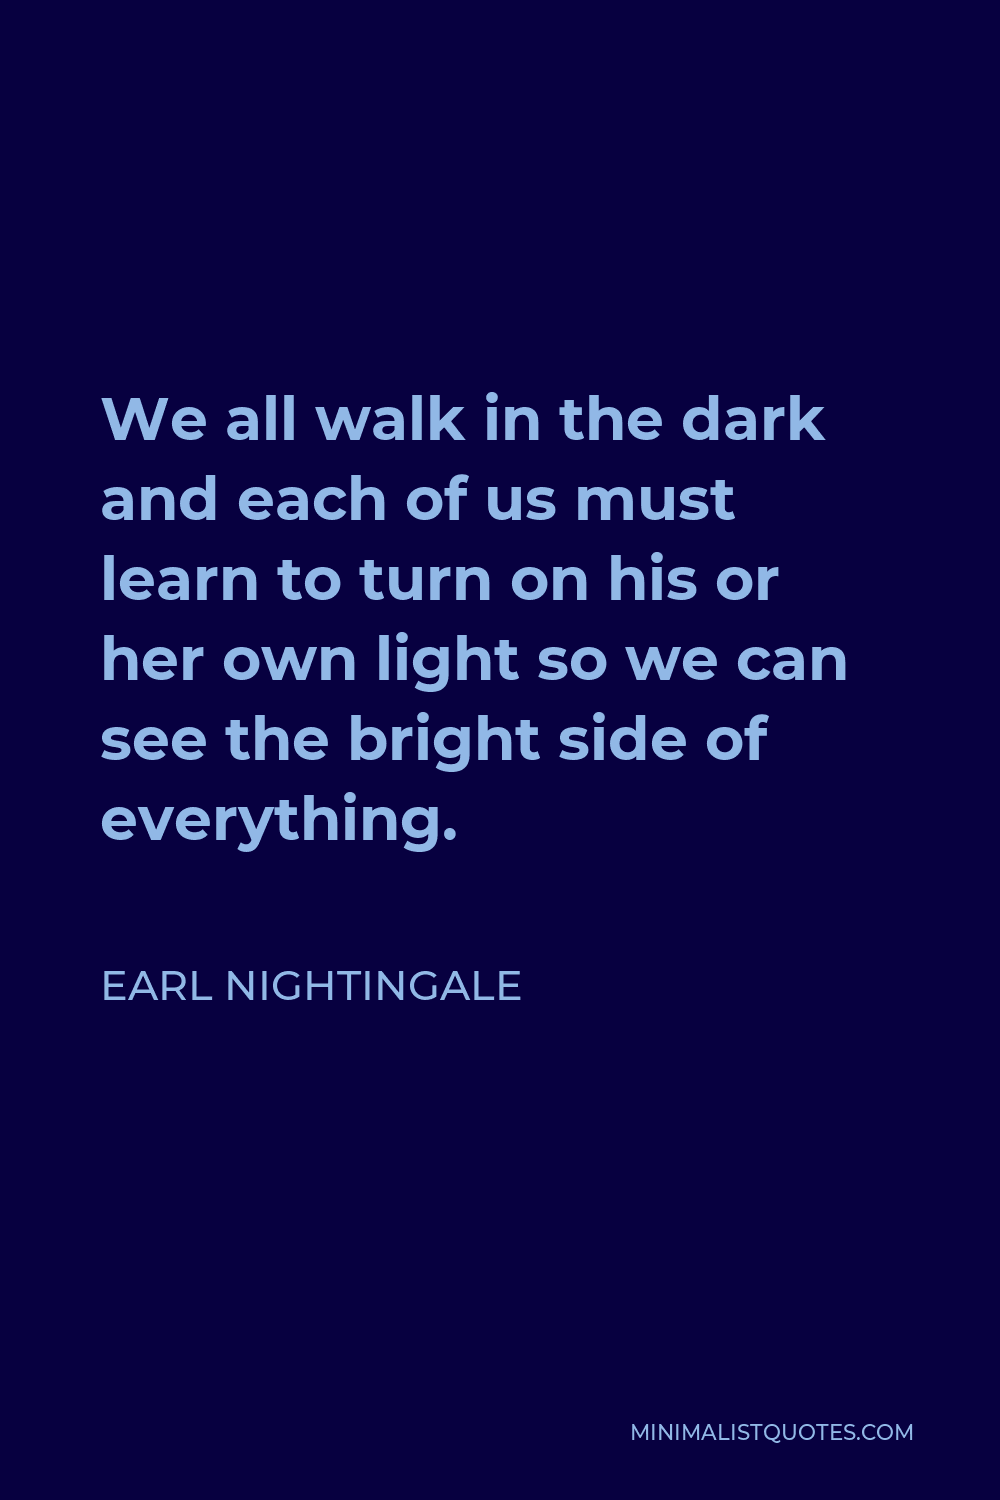 Earl Nightingale Quote - We all walk in the dark and each of us must learn to turn on his or her own light so we can see the bright side of everything.